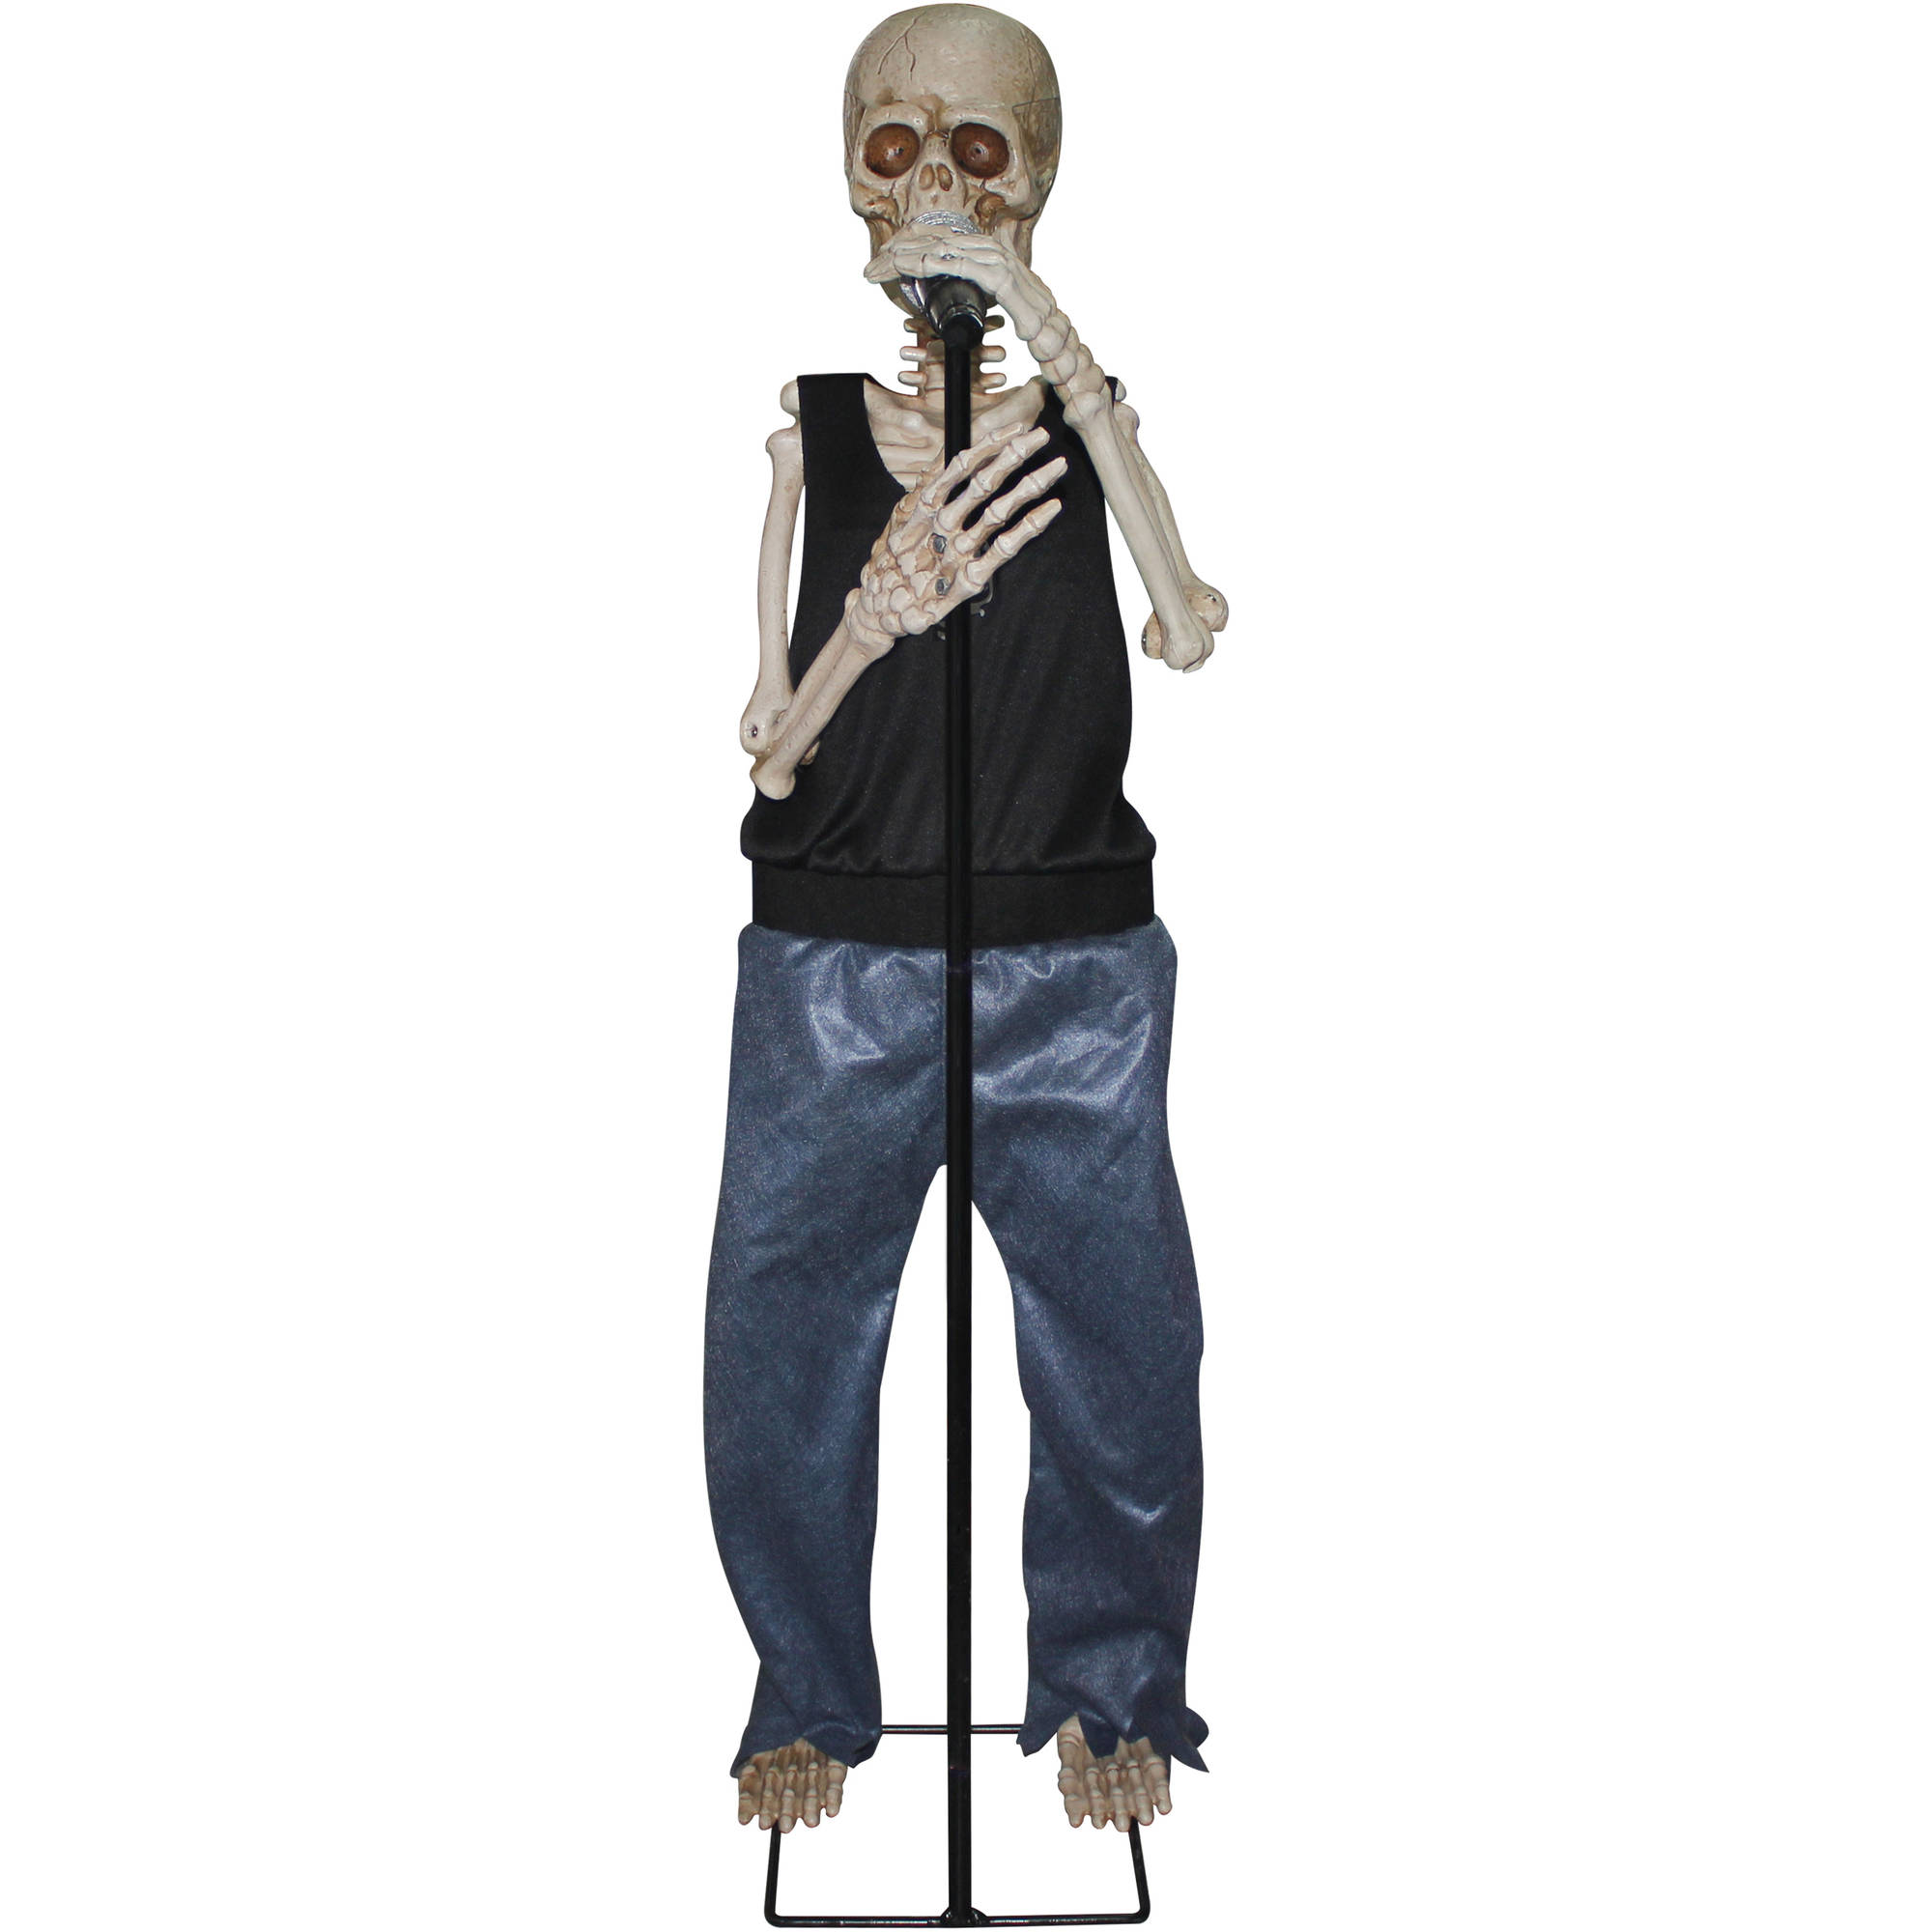 Singing and Dancing Animated Skeleton Halloween Decoration - image 1 of 2